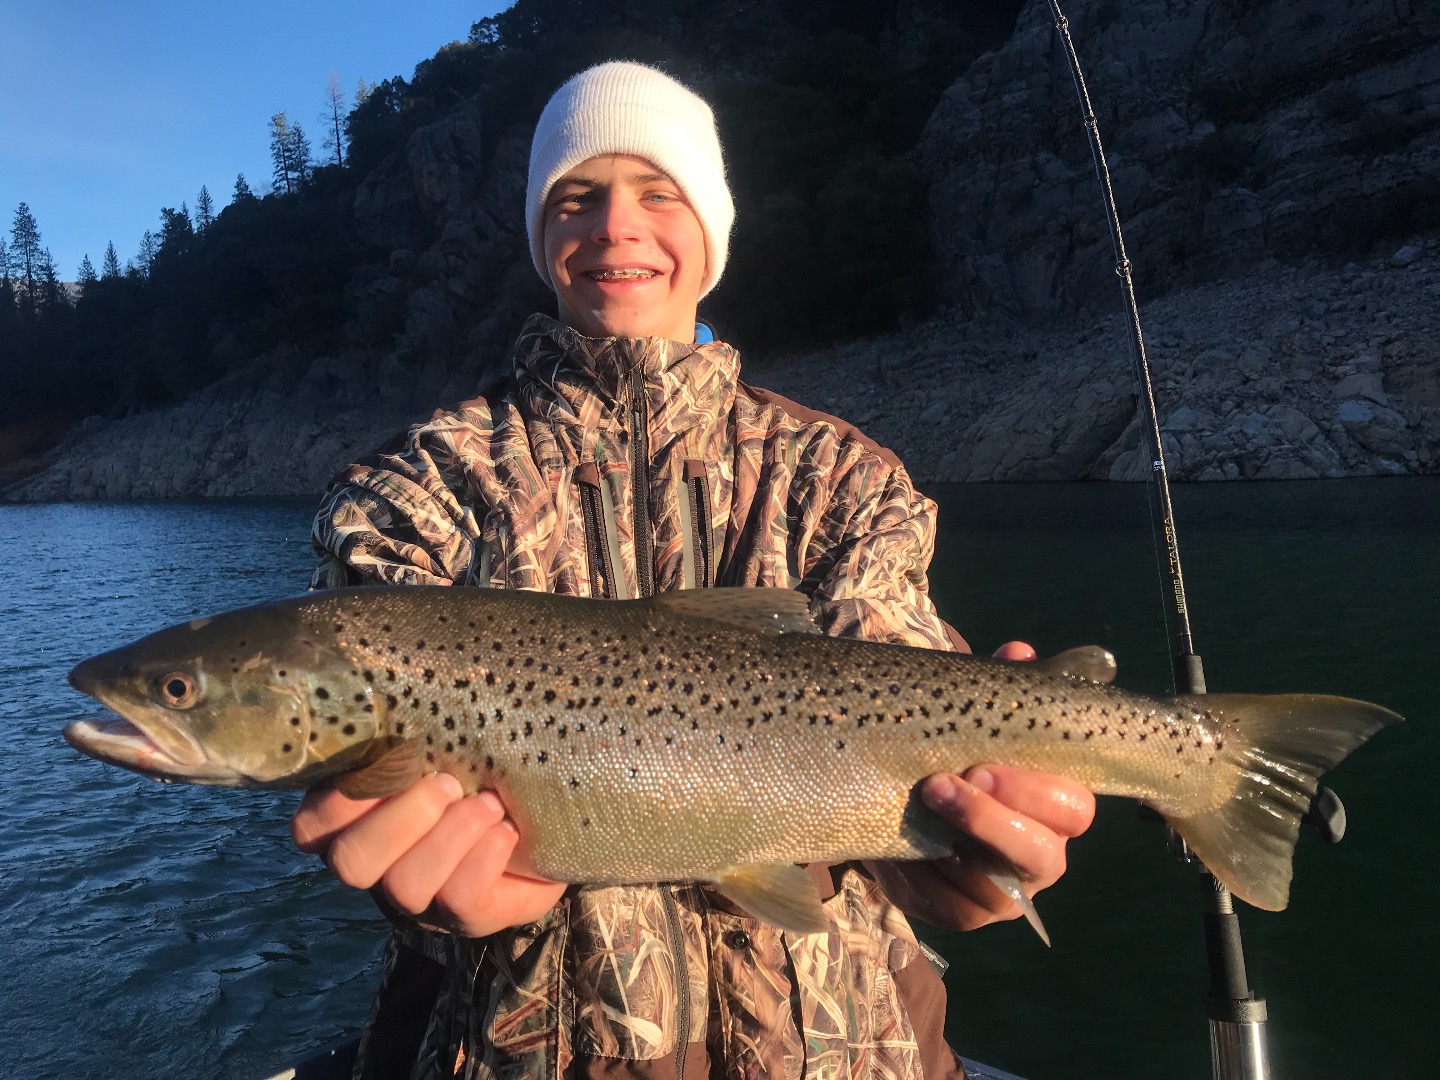 Shasta Lake trout fishing going strong!